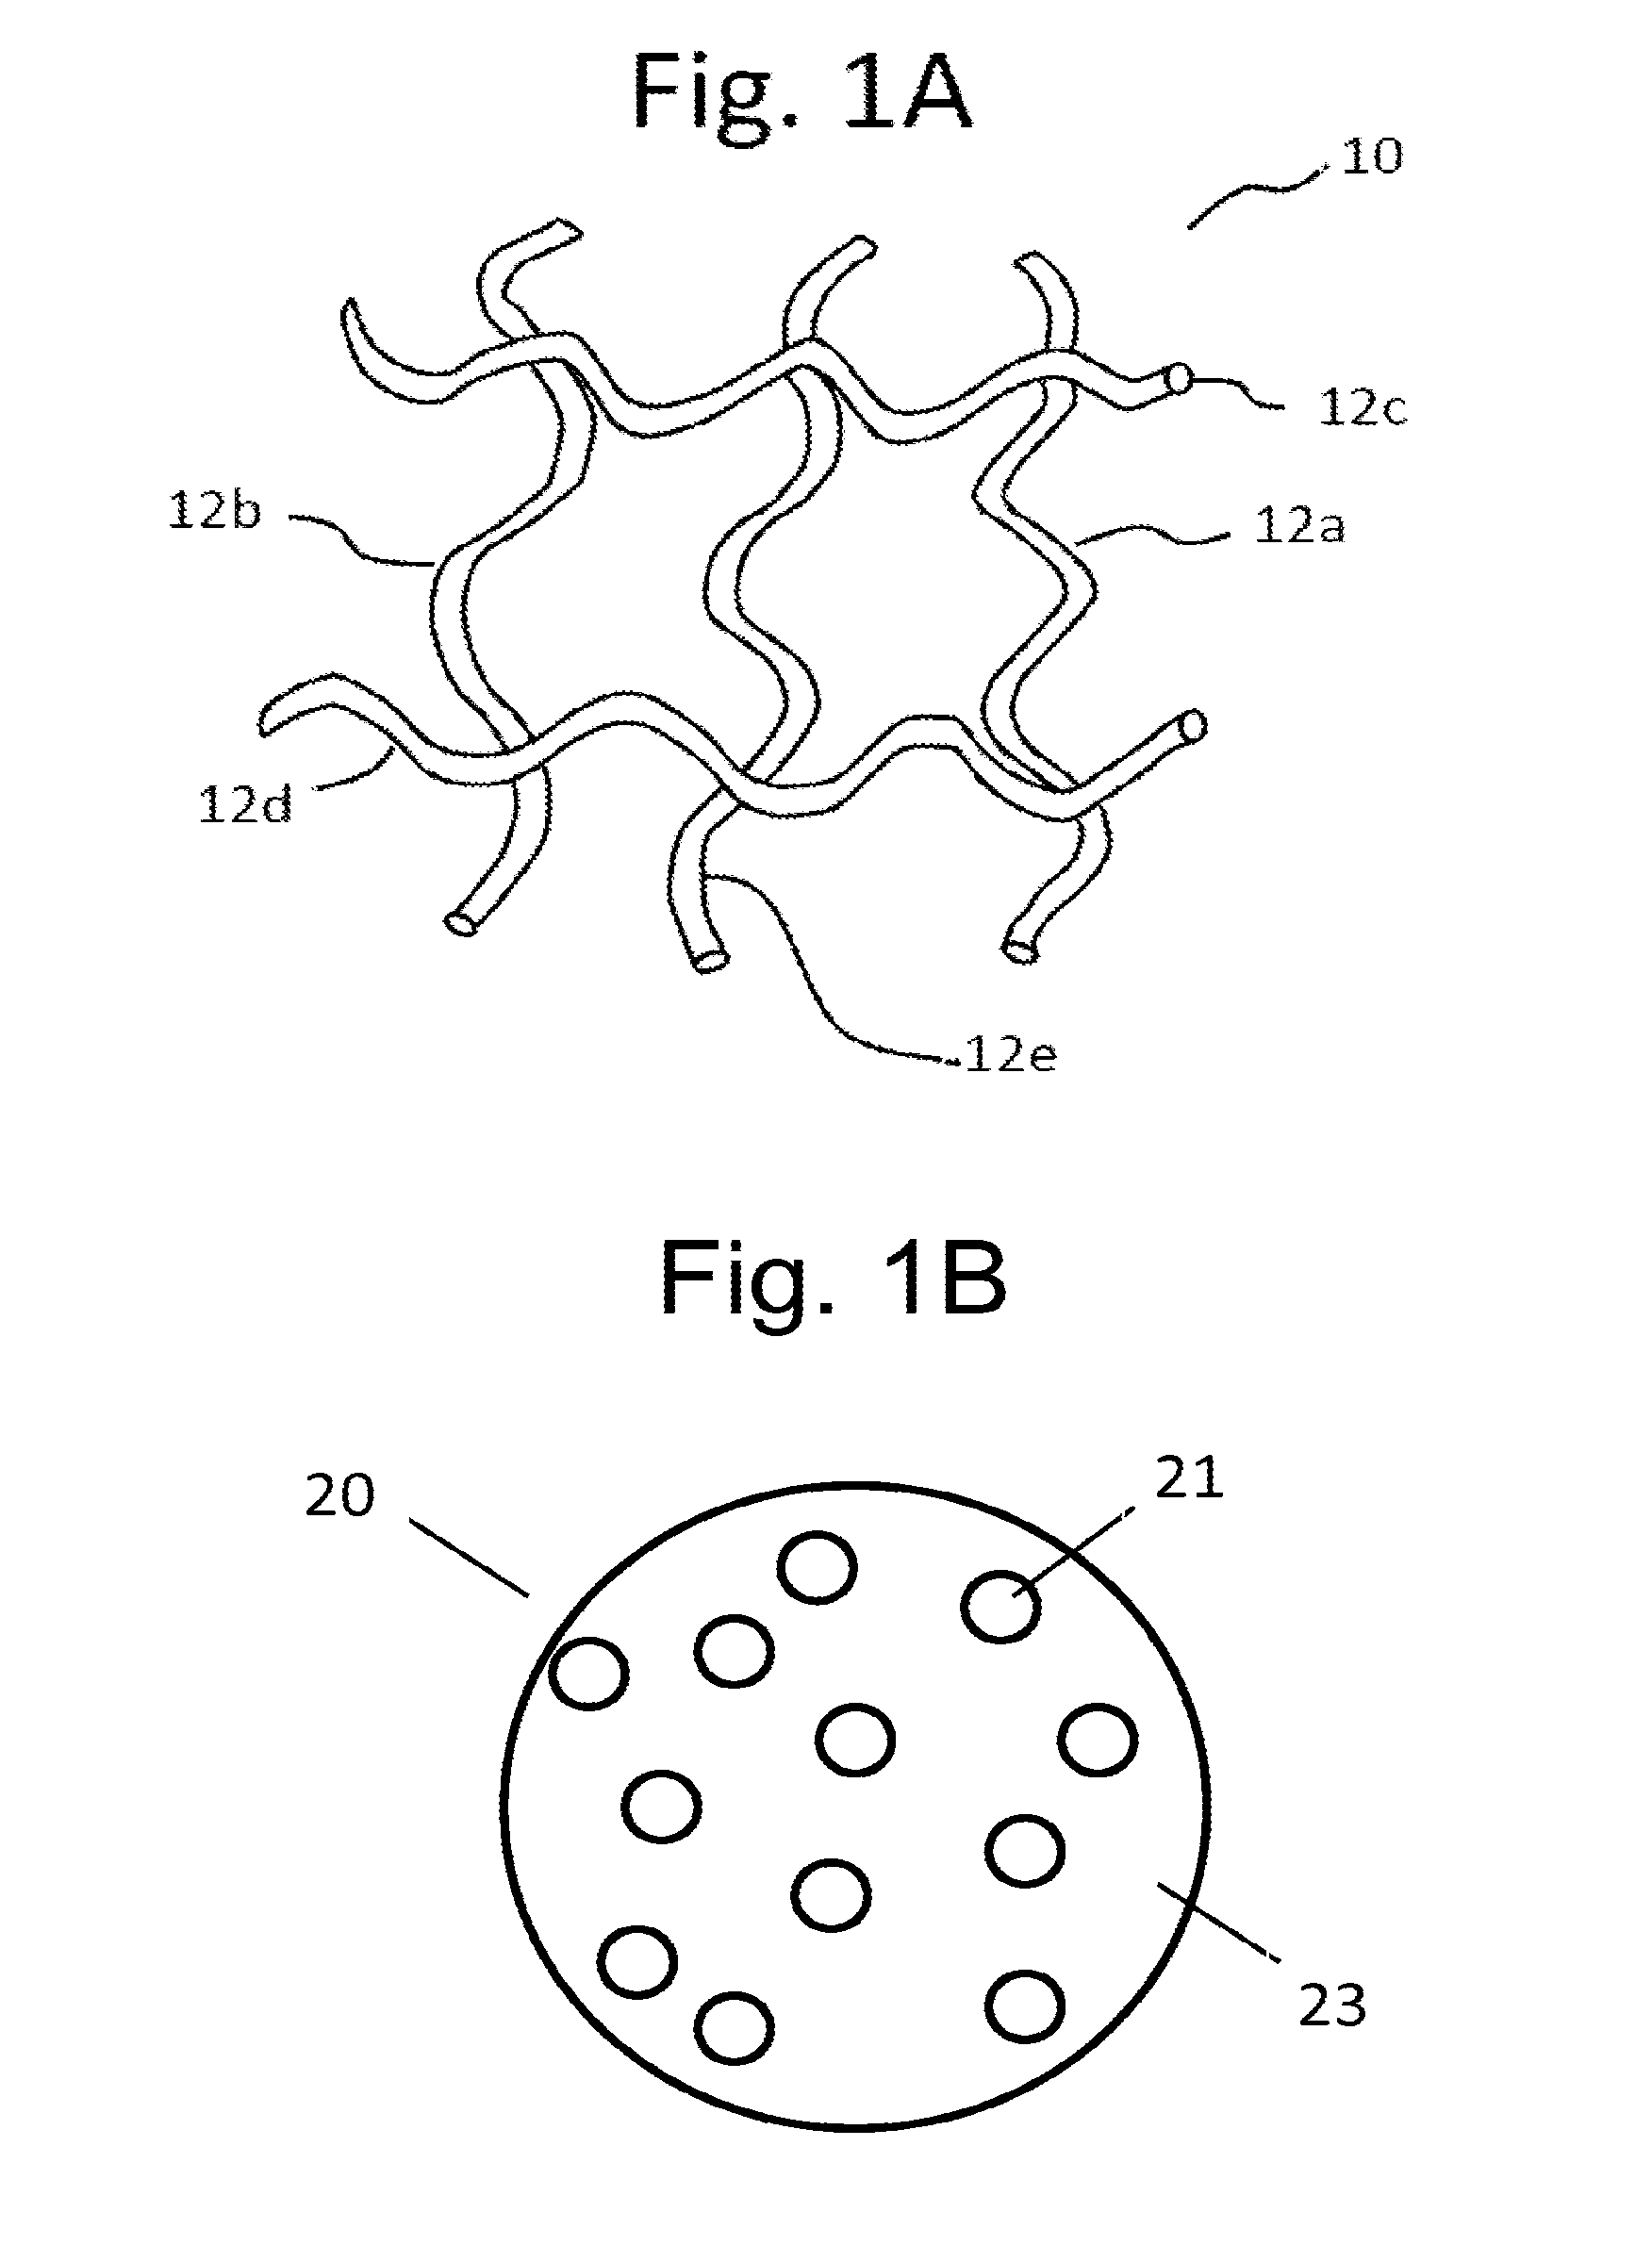 Biodegradable articles and methods for treatment of pelvic floor disorders including extracellular matrix material